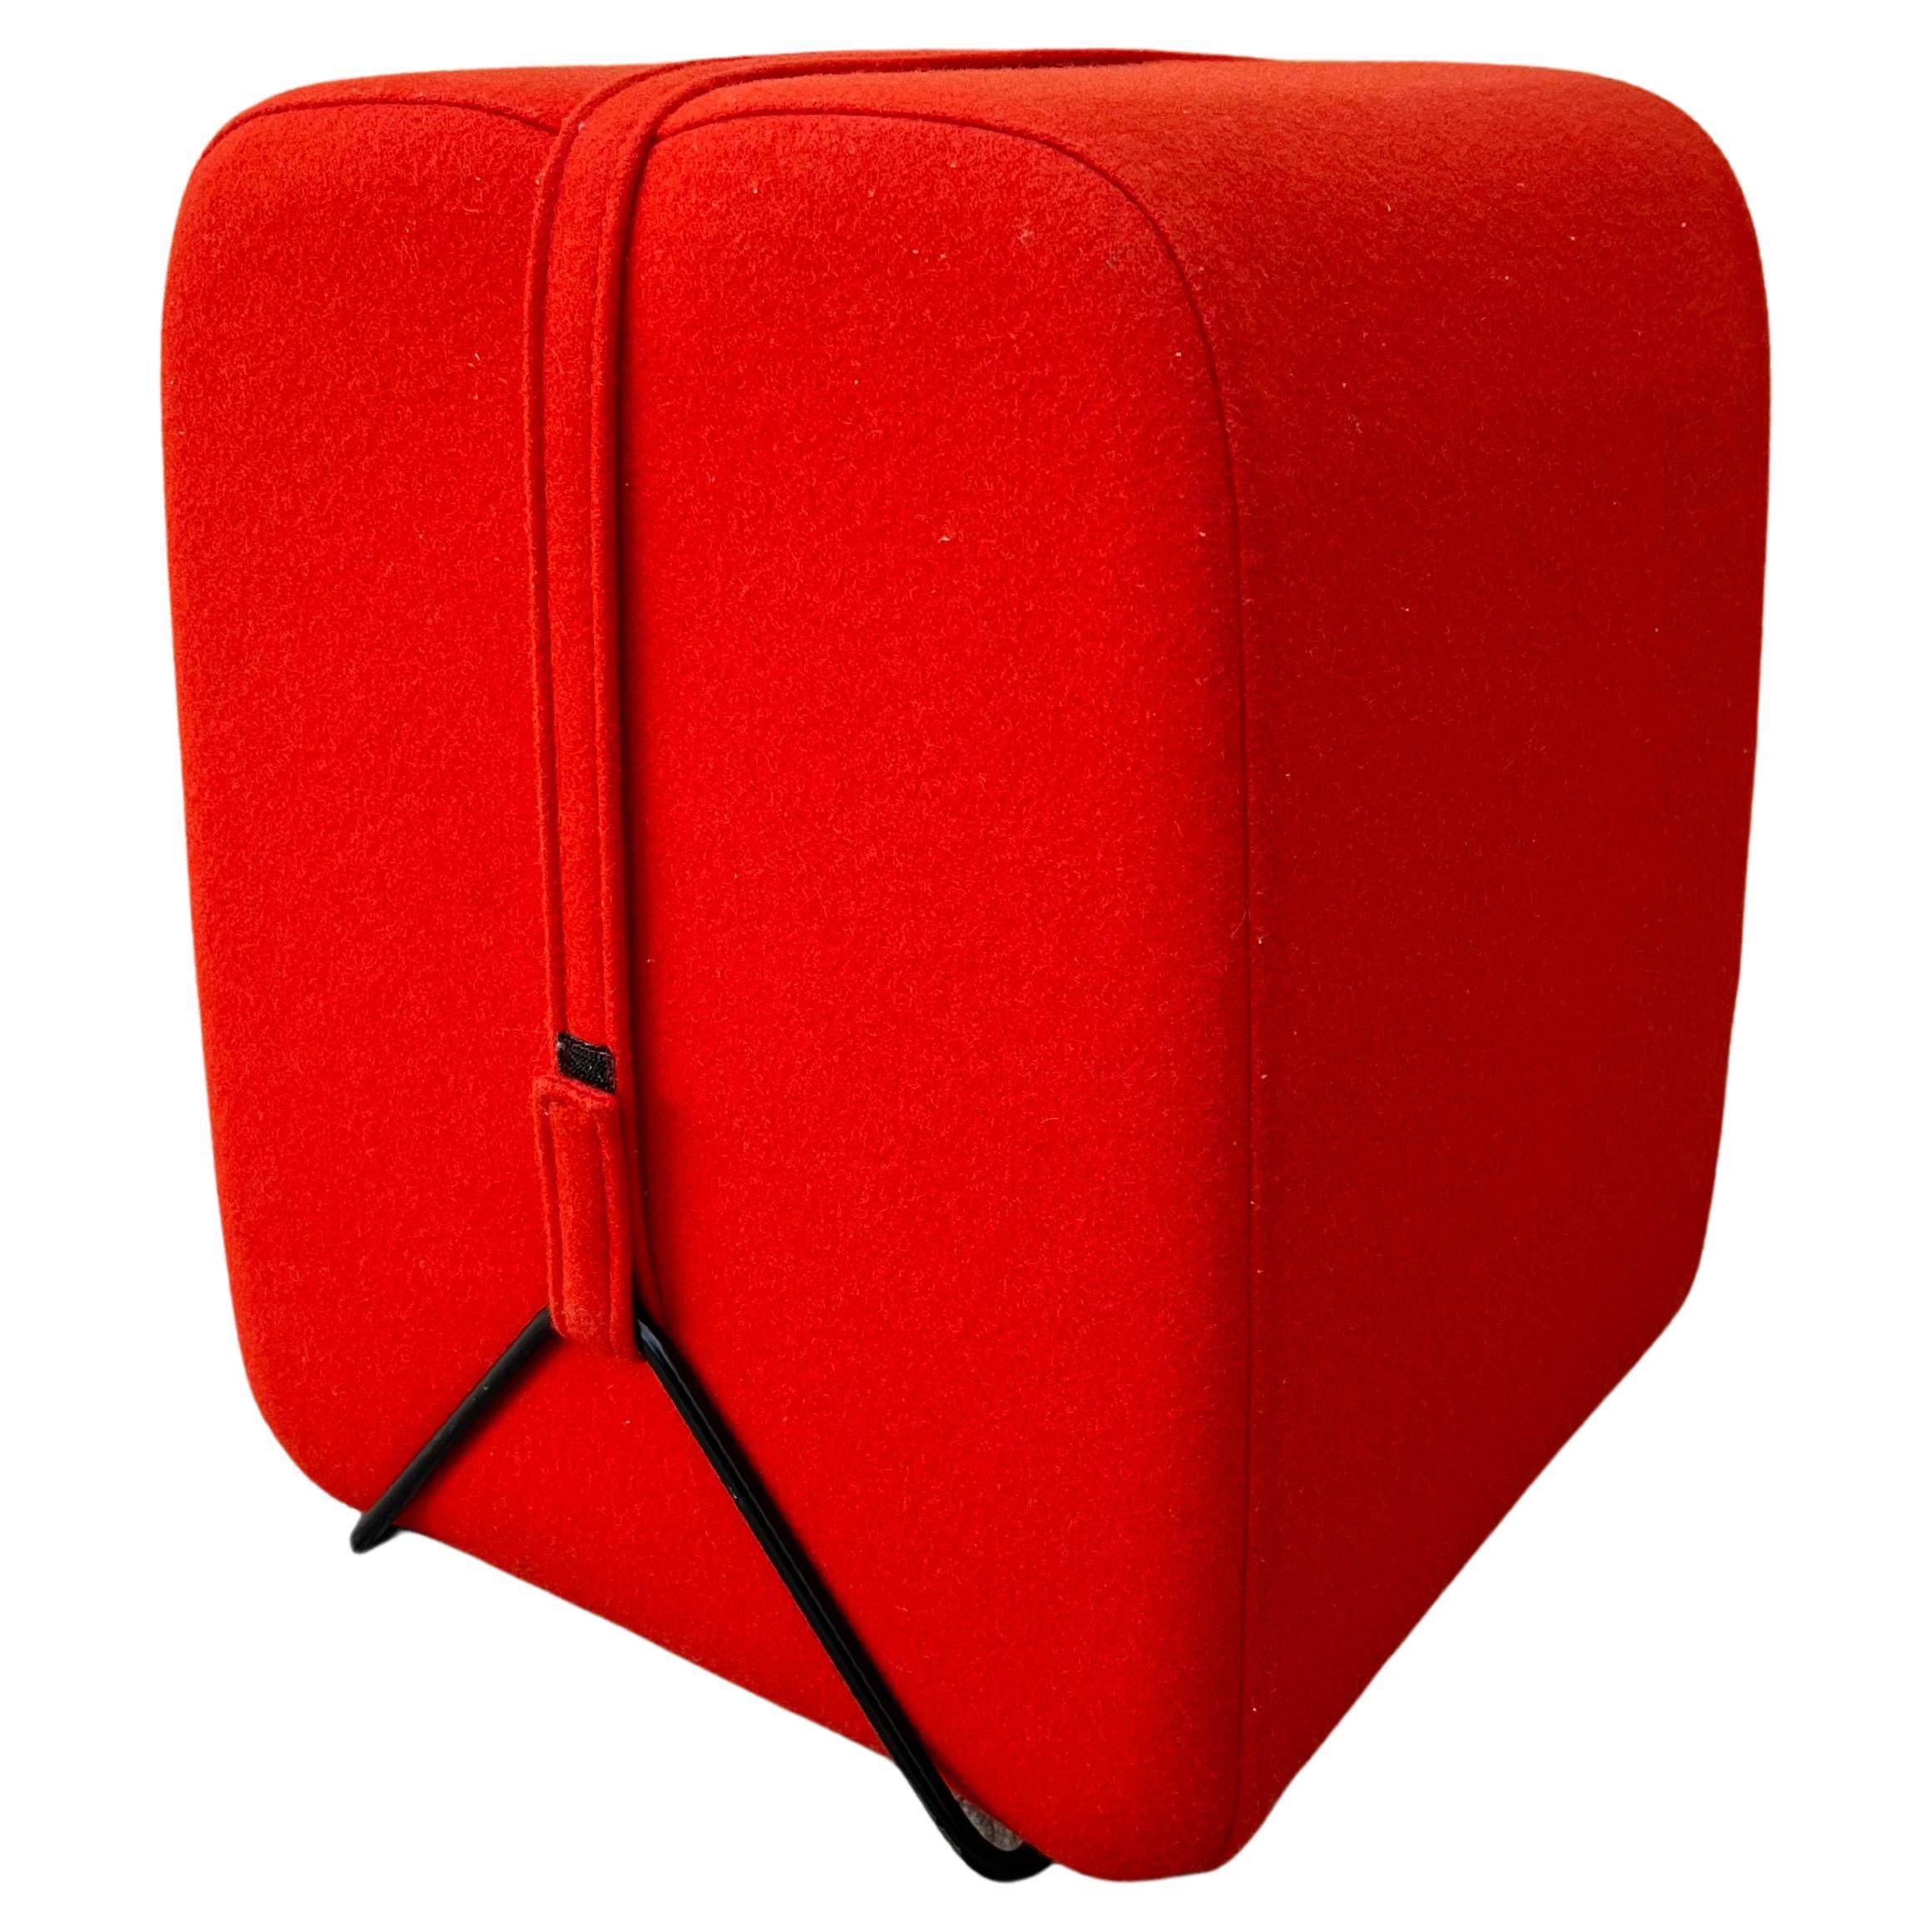 Contemporary Mobidec Footstool by Pierre Charpin for Ligne Roset